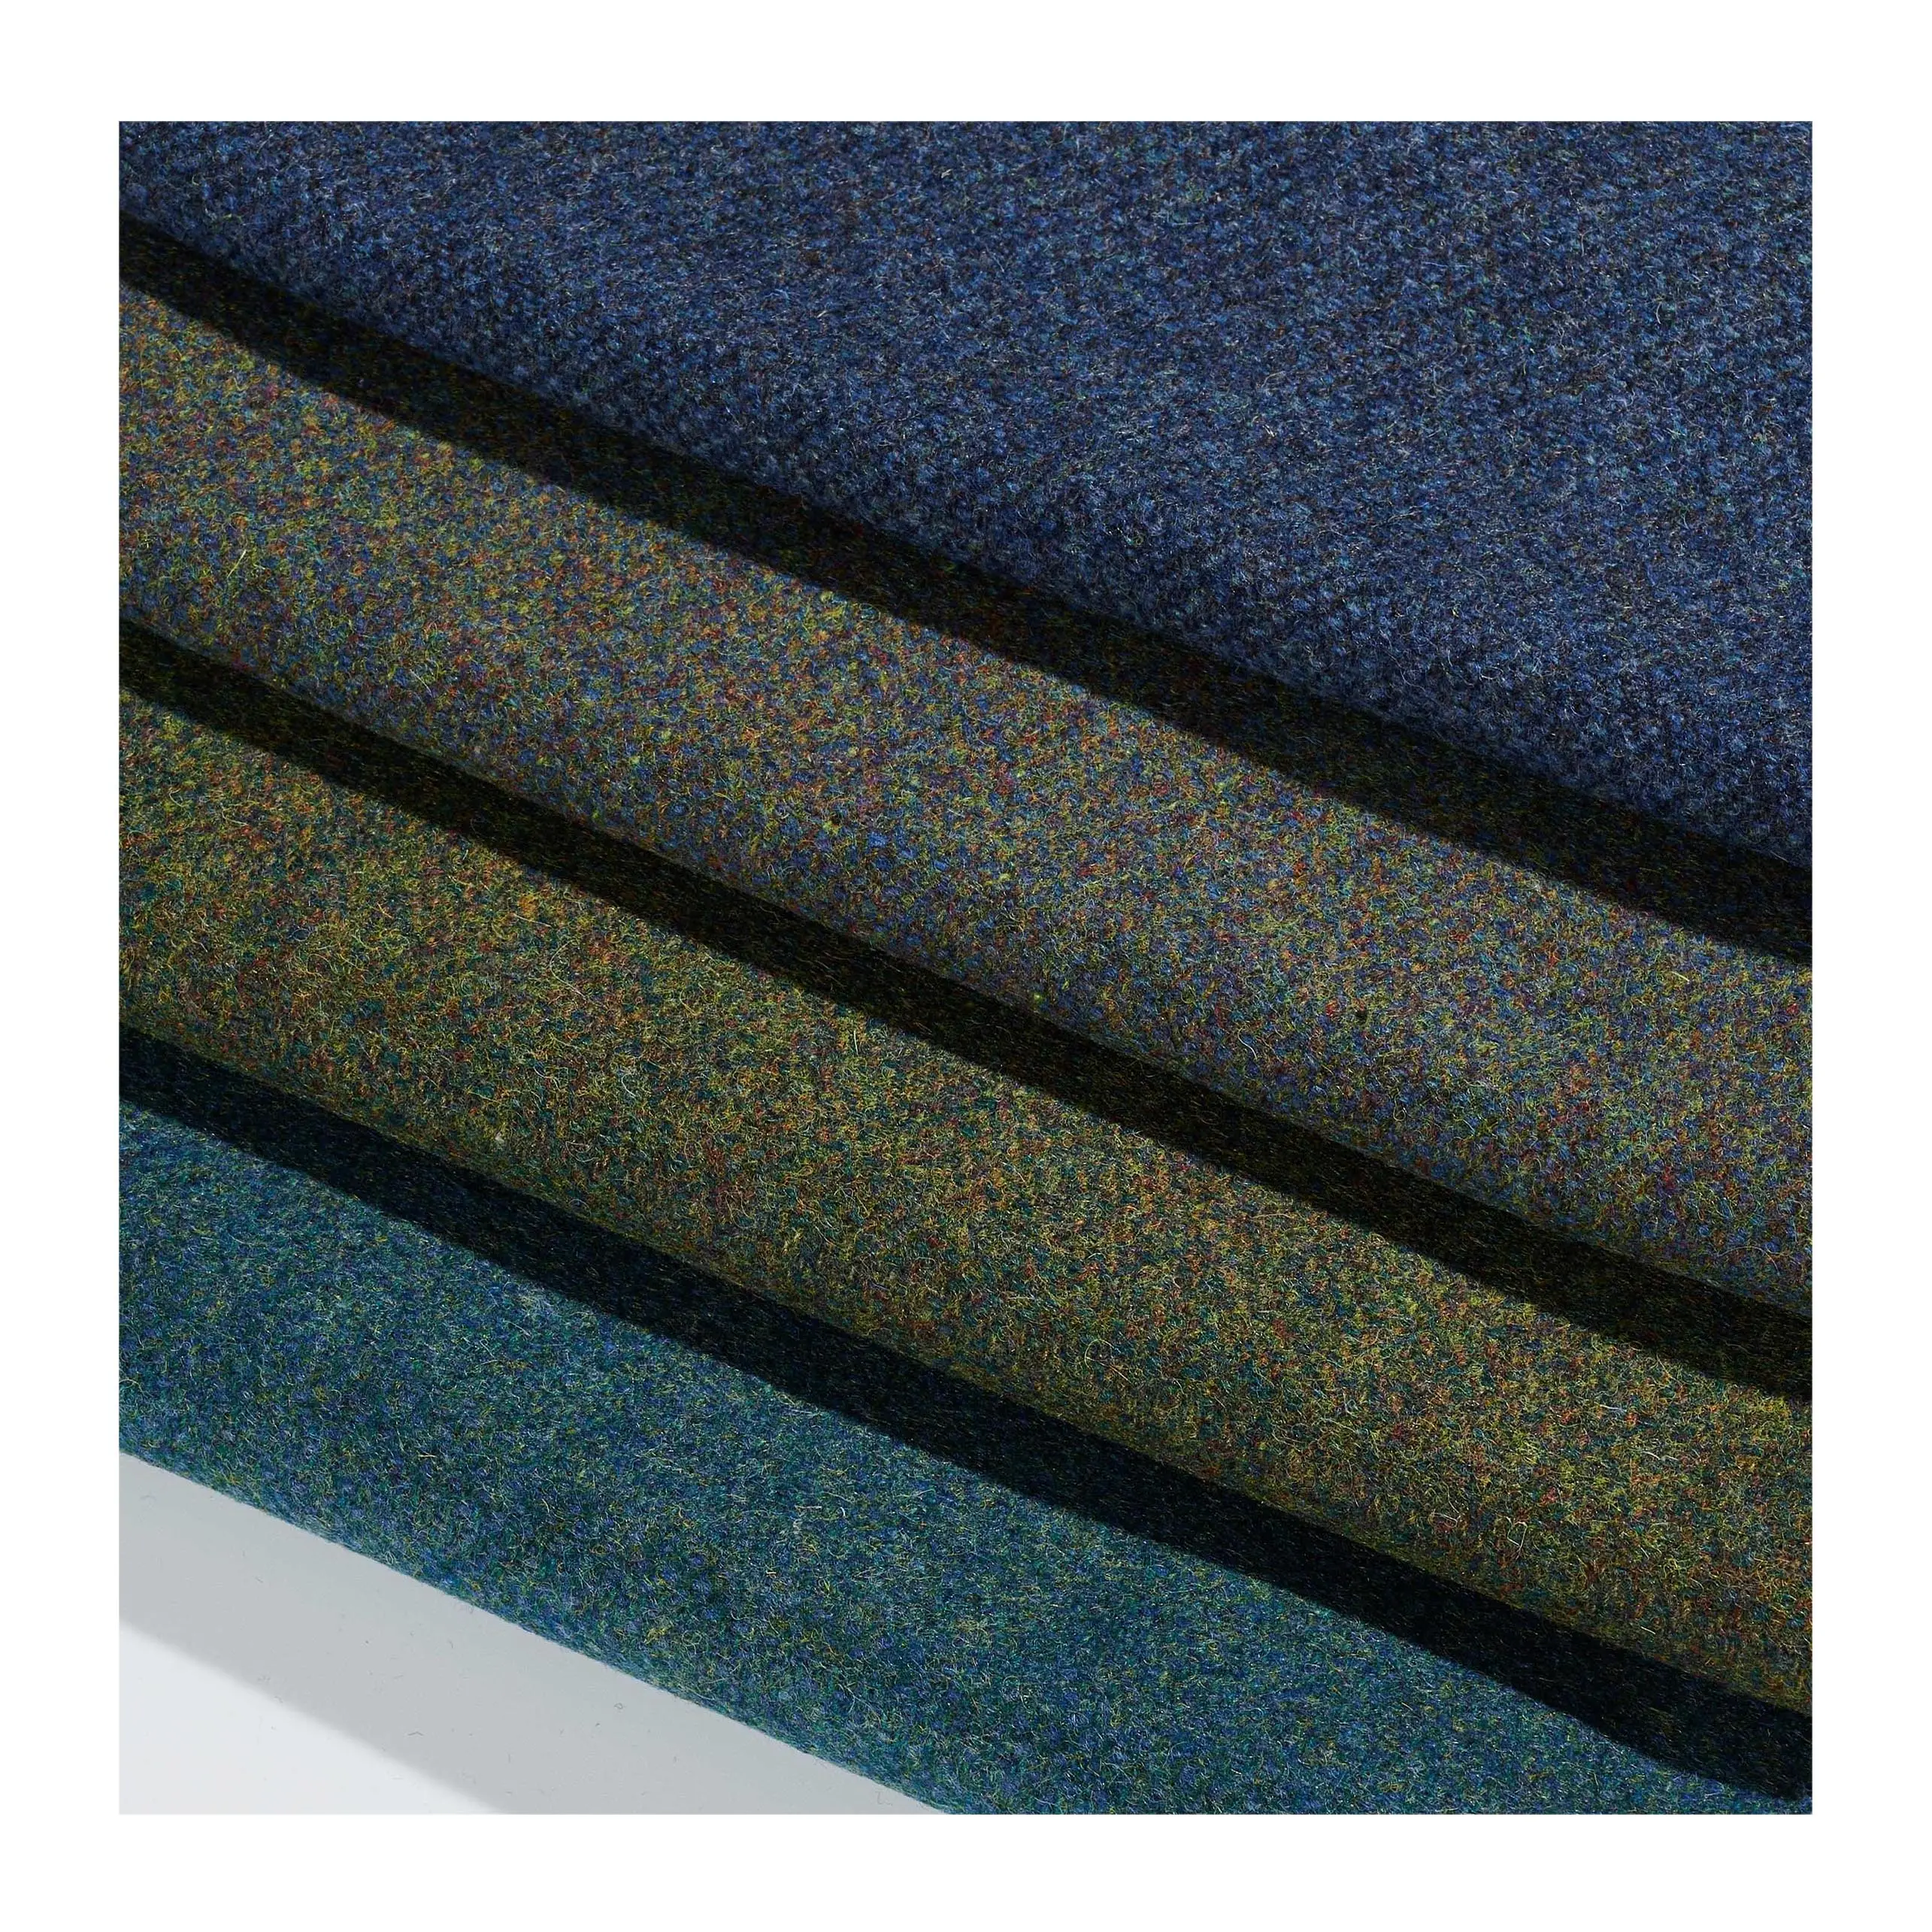 Best Selling Single Sided 320gsm 50% Wool 50% Polyester Tweed Wool Fabric For Coats